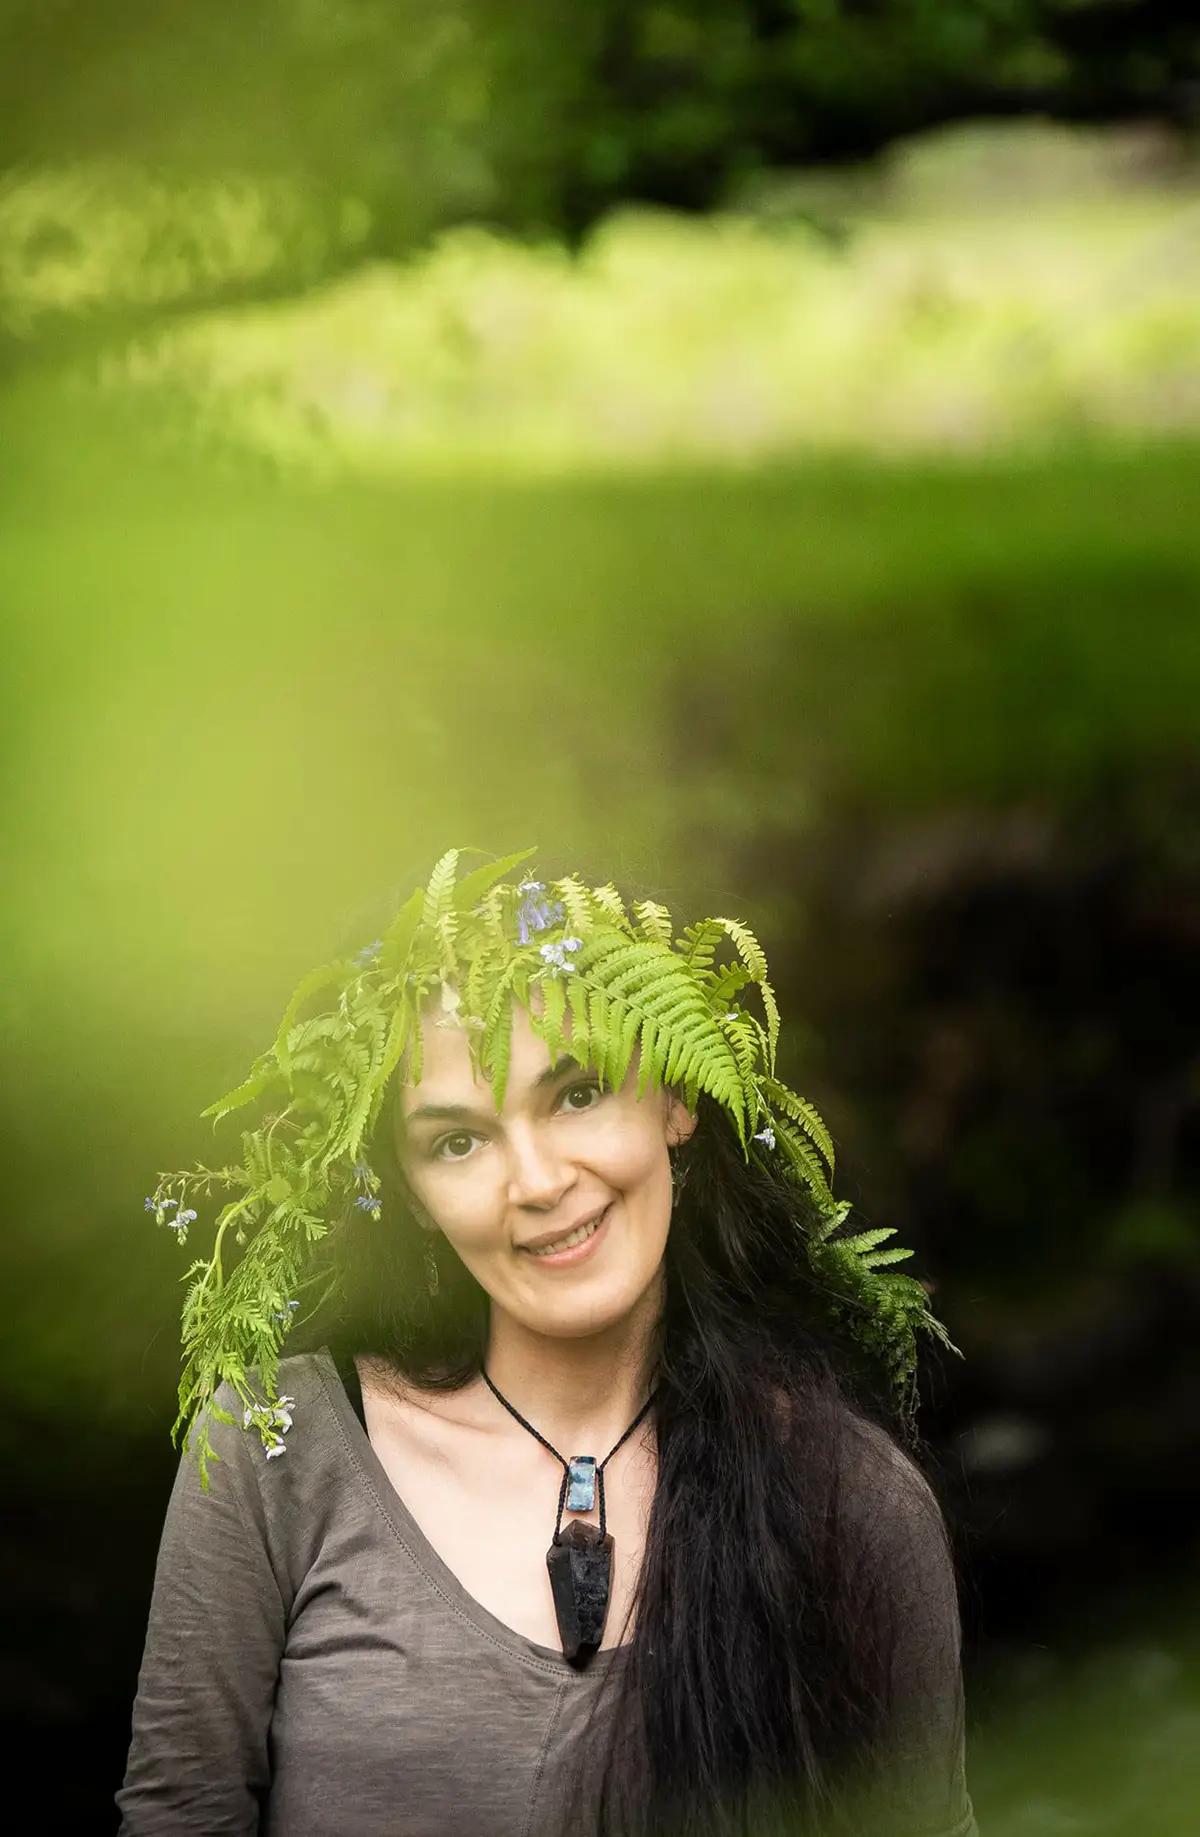 Portrait of a smiling dark-hair girl wearing a wreath made of leaves